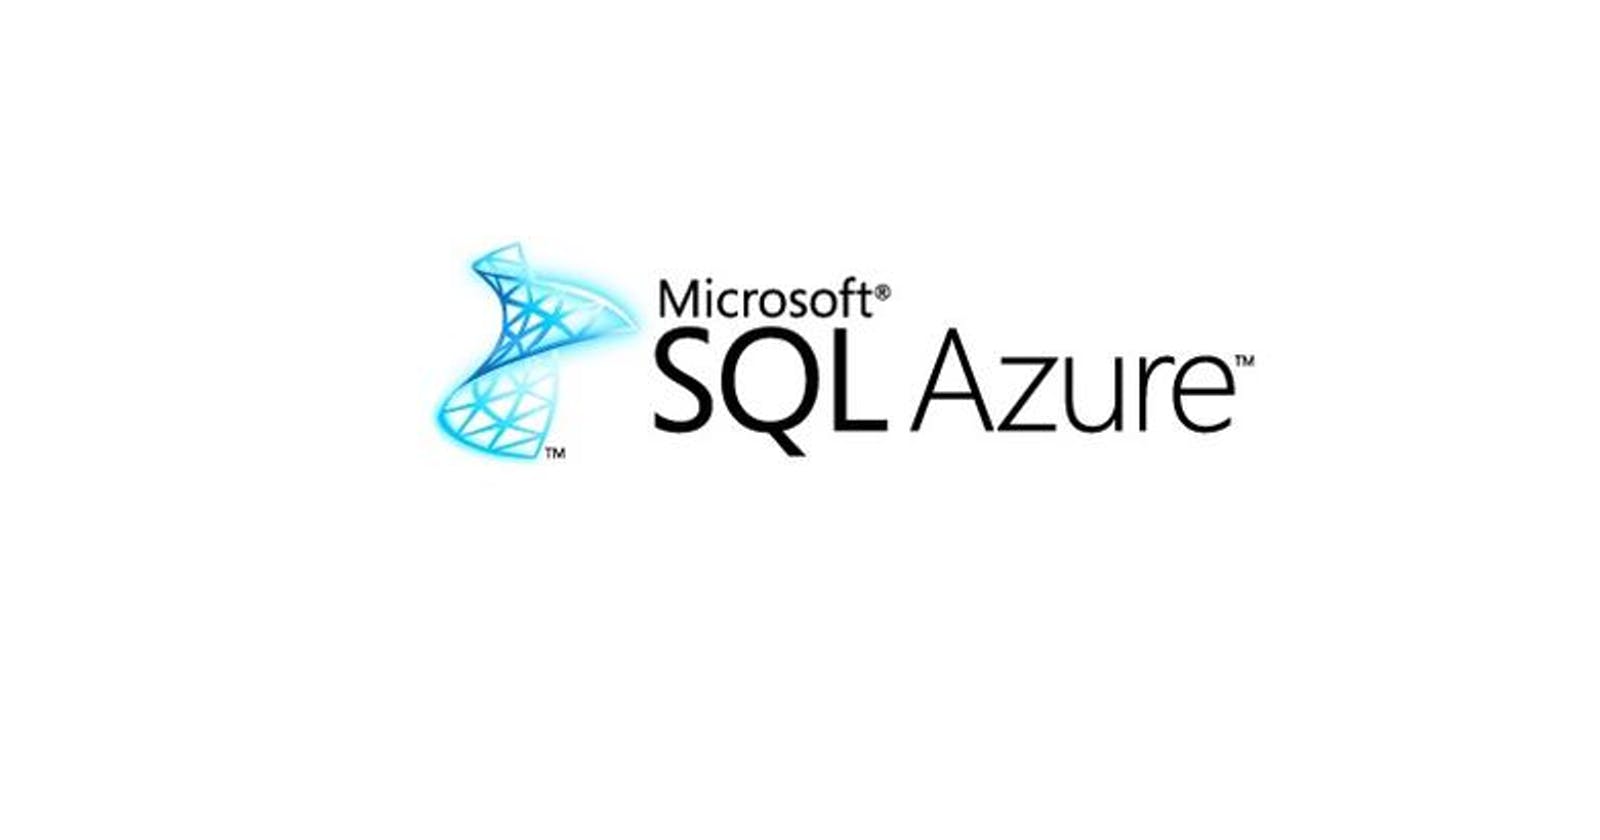 Microsoft Azure : Setting Up an Azure SQL Database step by step